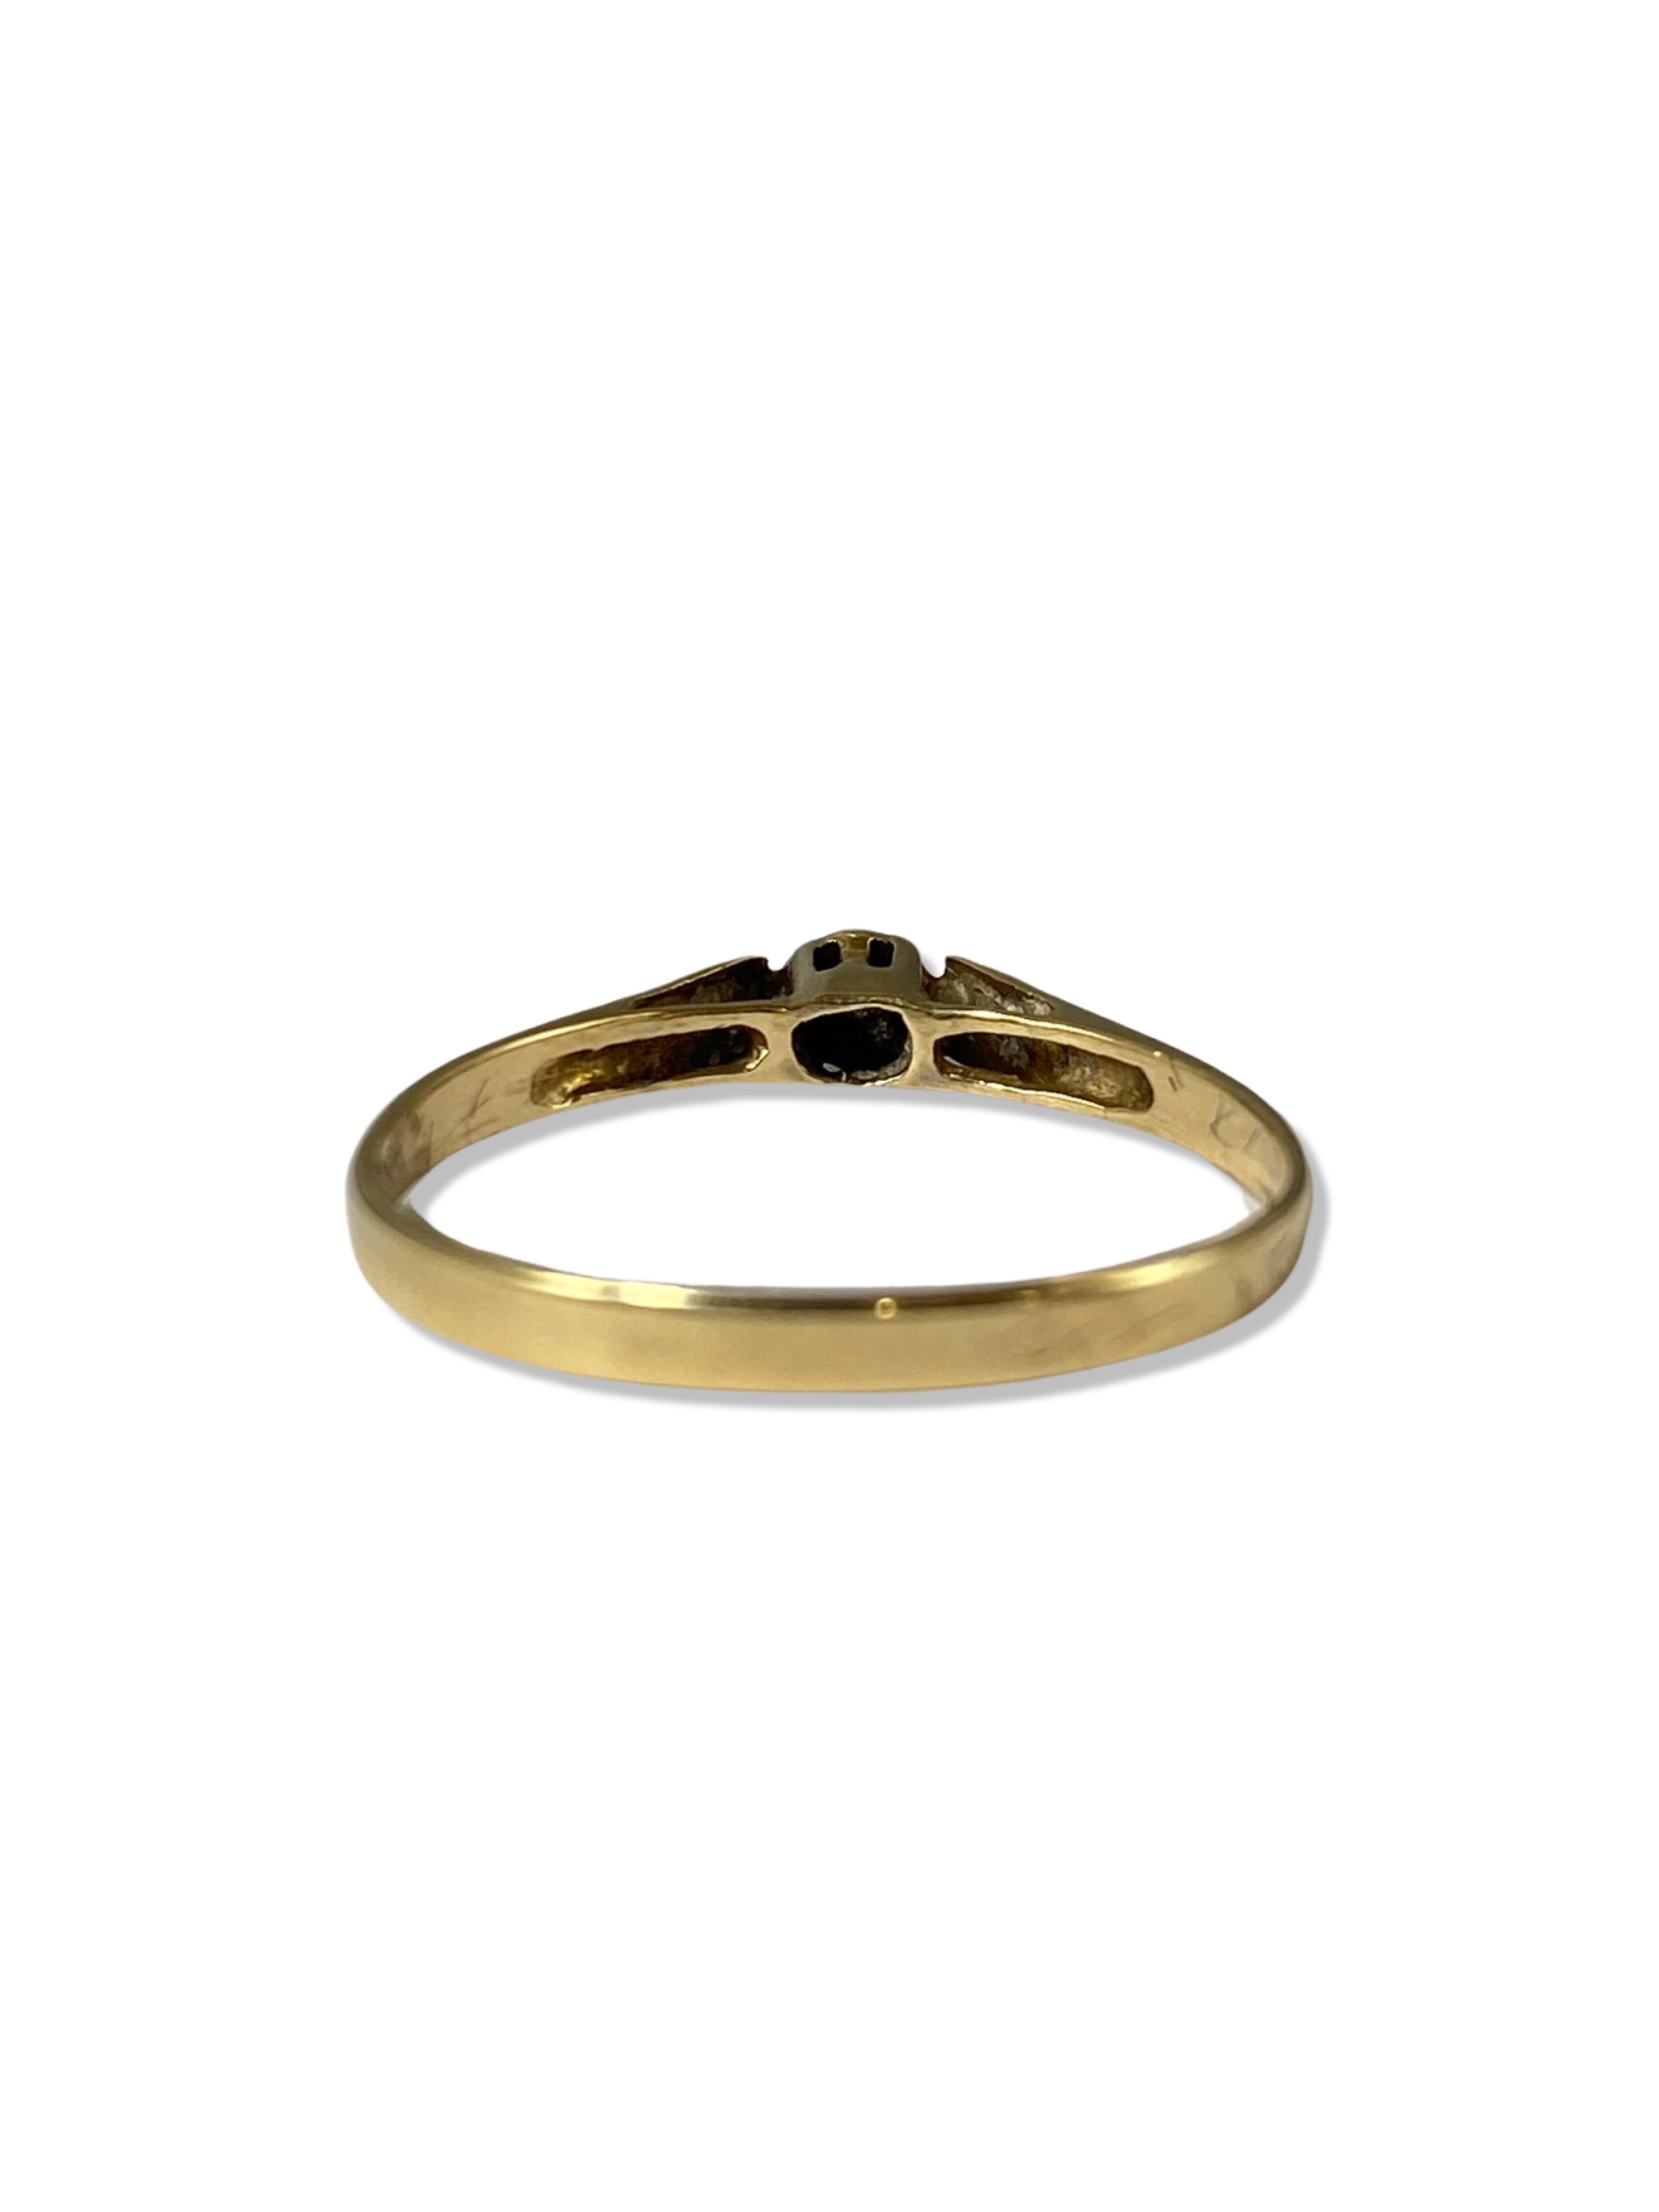 9ct Yellow Gold Birmingham 1982 Diamond Solitaire Ring featuring bark design band weighing 0.87 - Image 2 of 2